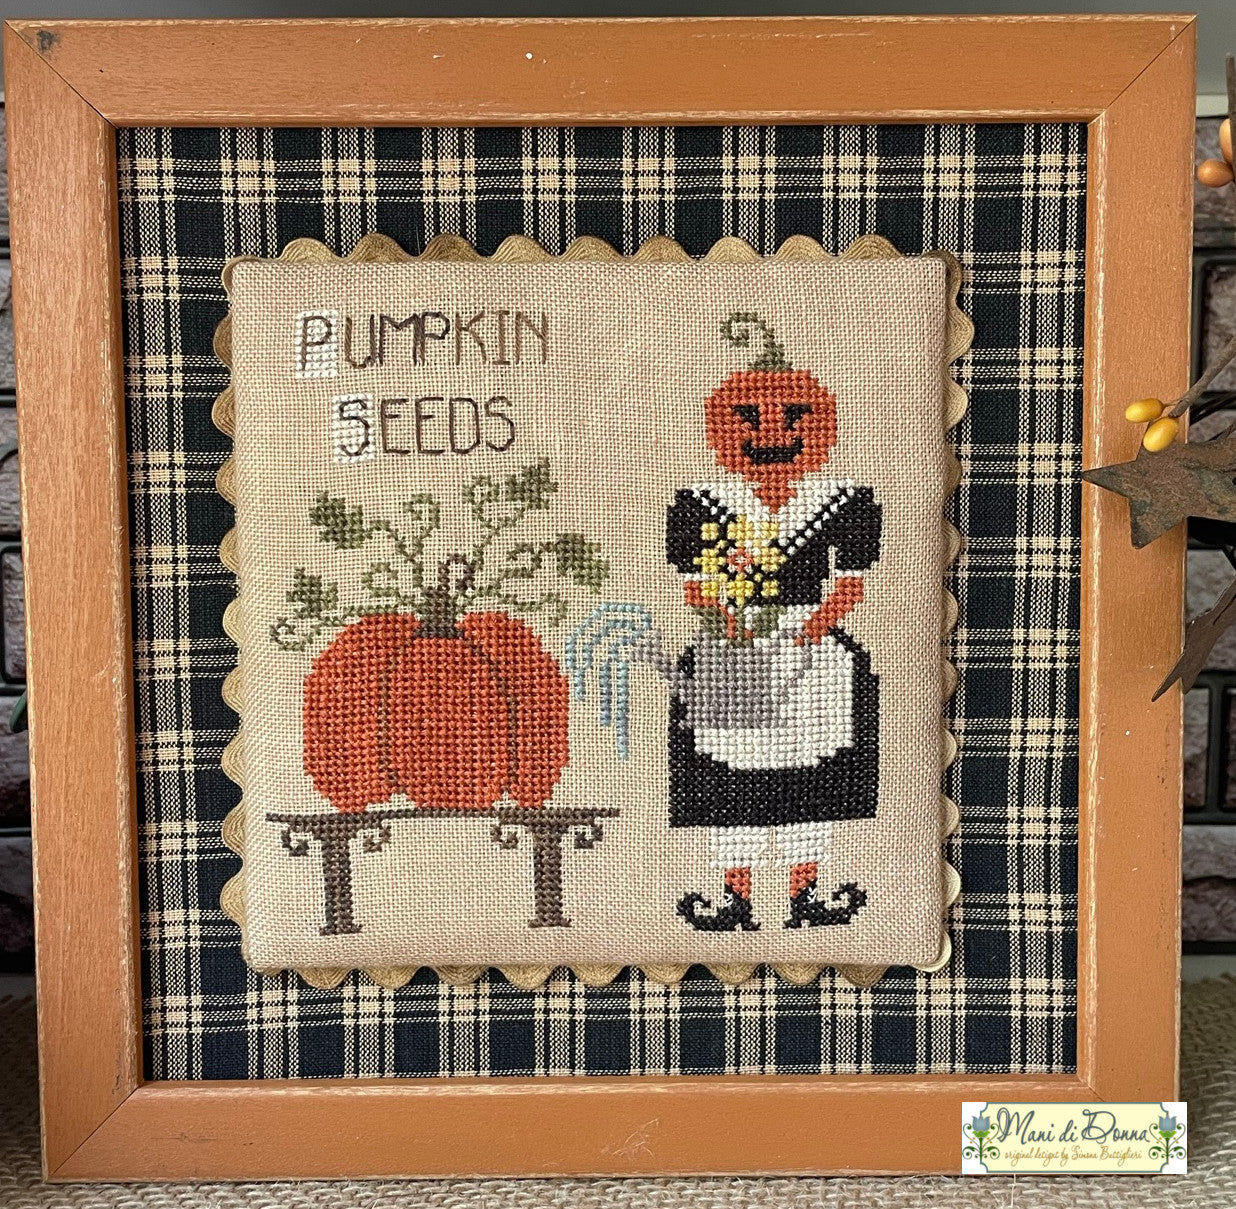 The Seeds of Lady Pumpkin by Mani di Donna